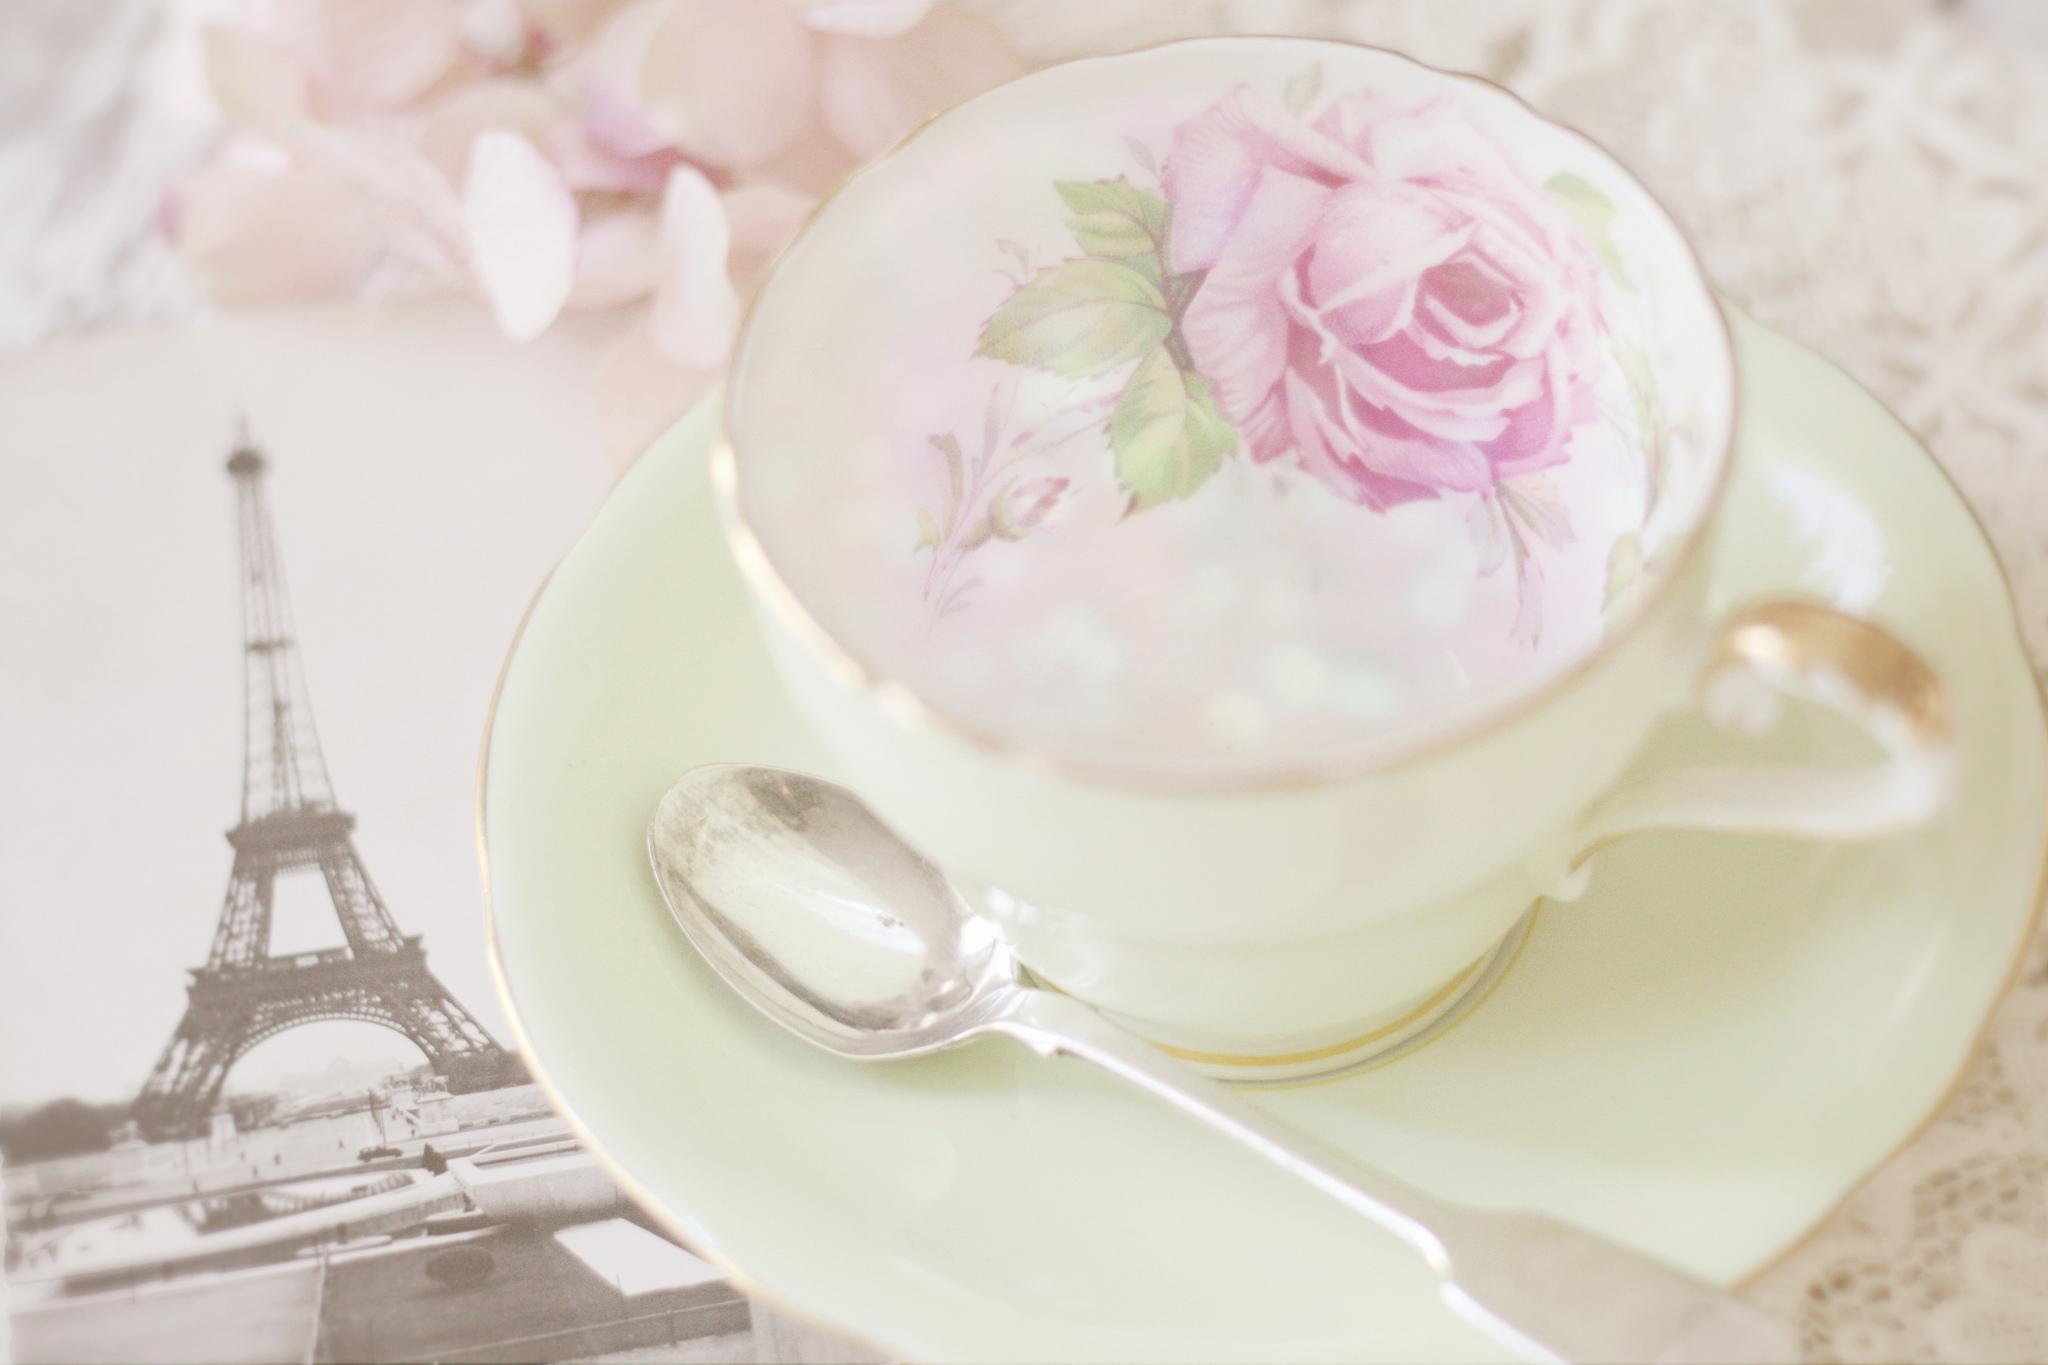 Cup of tea with paris - (#92342) - High Quality and Resolution ...